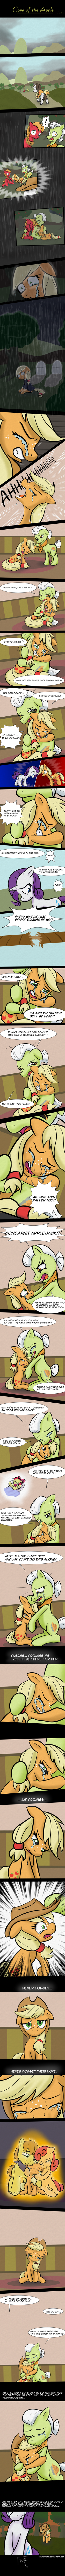 [Obrázek: core_of_the_apple_part_4_by_naterrang-d6uwna2.png]